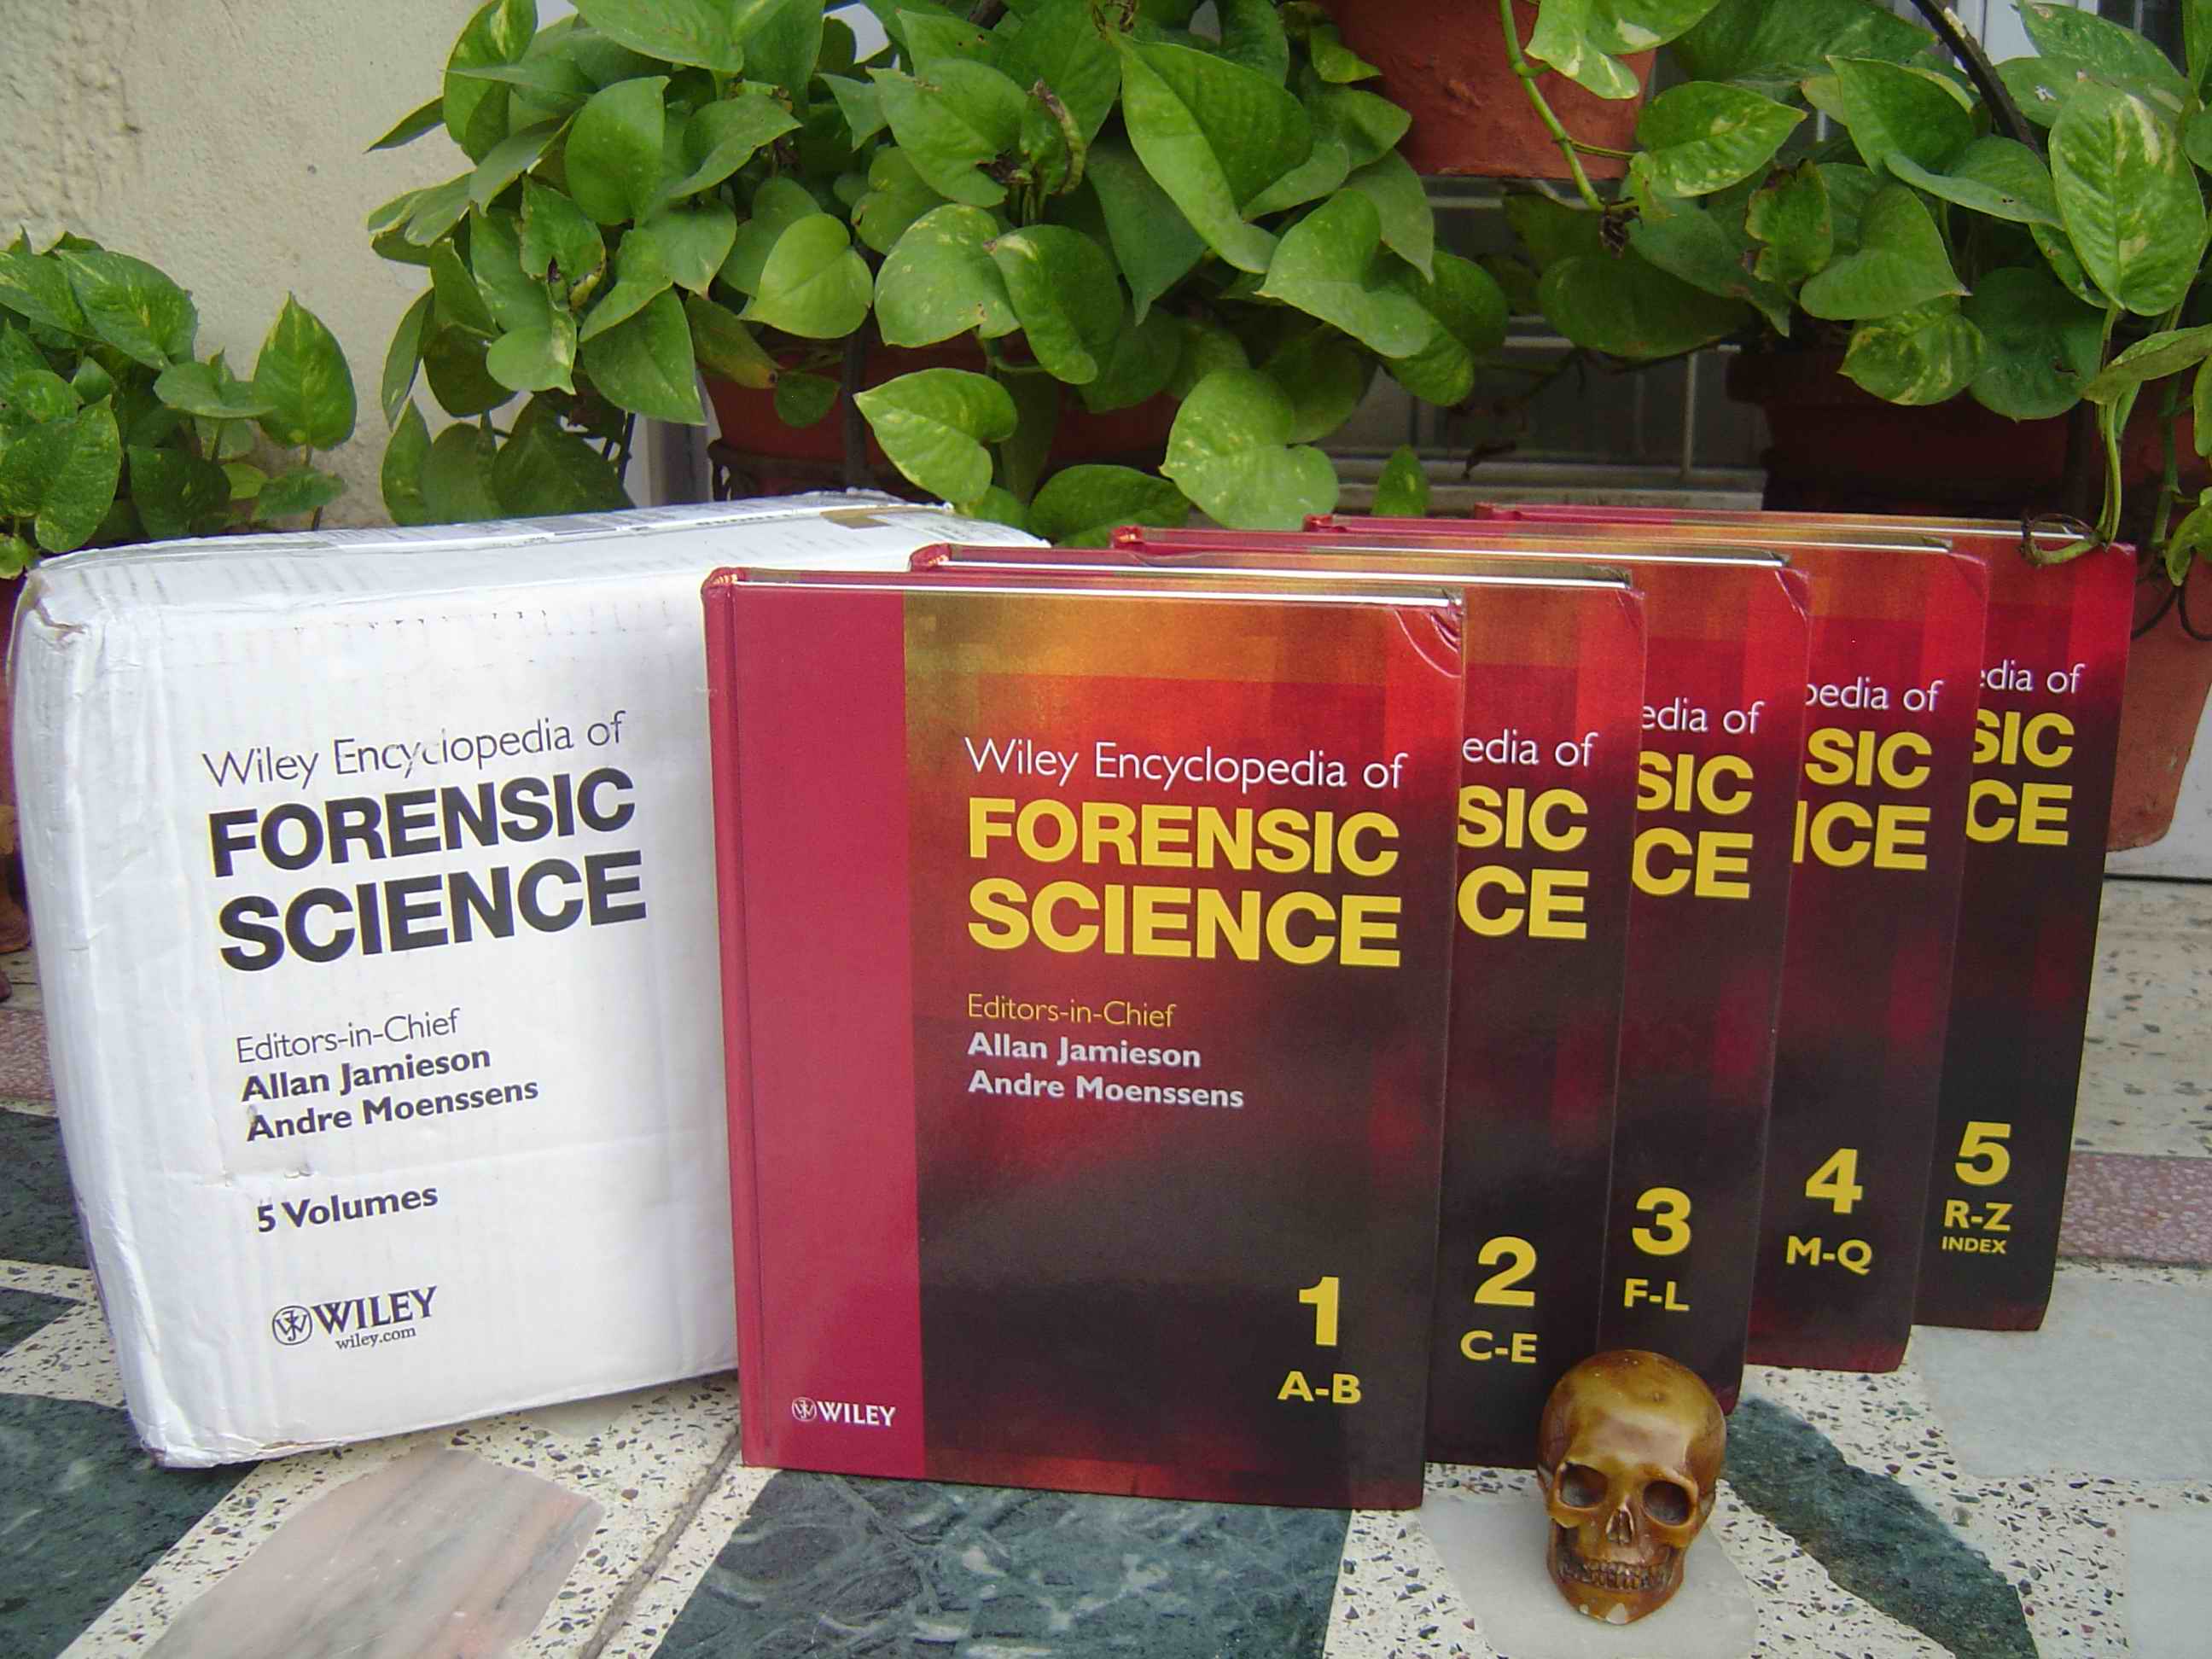 Wiley Encyclopedia of Forensic Science (5 volumes), edited by Allan Jamieson and Andre Moenssens